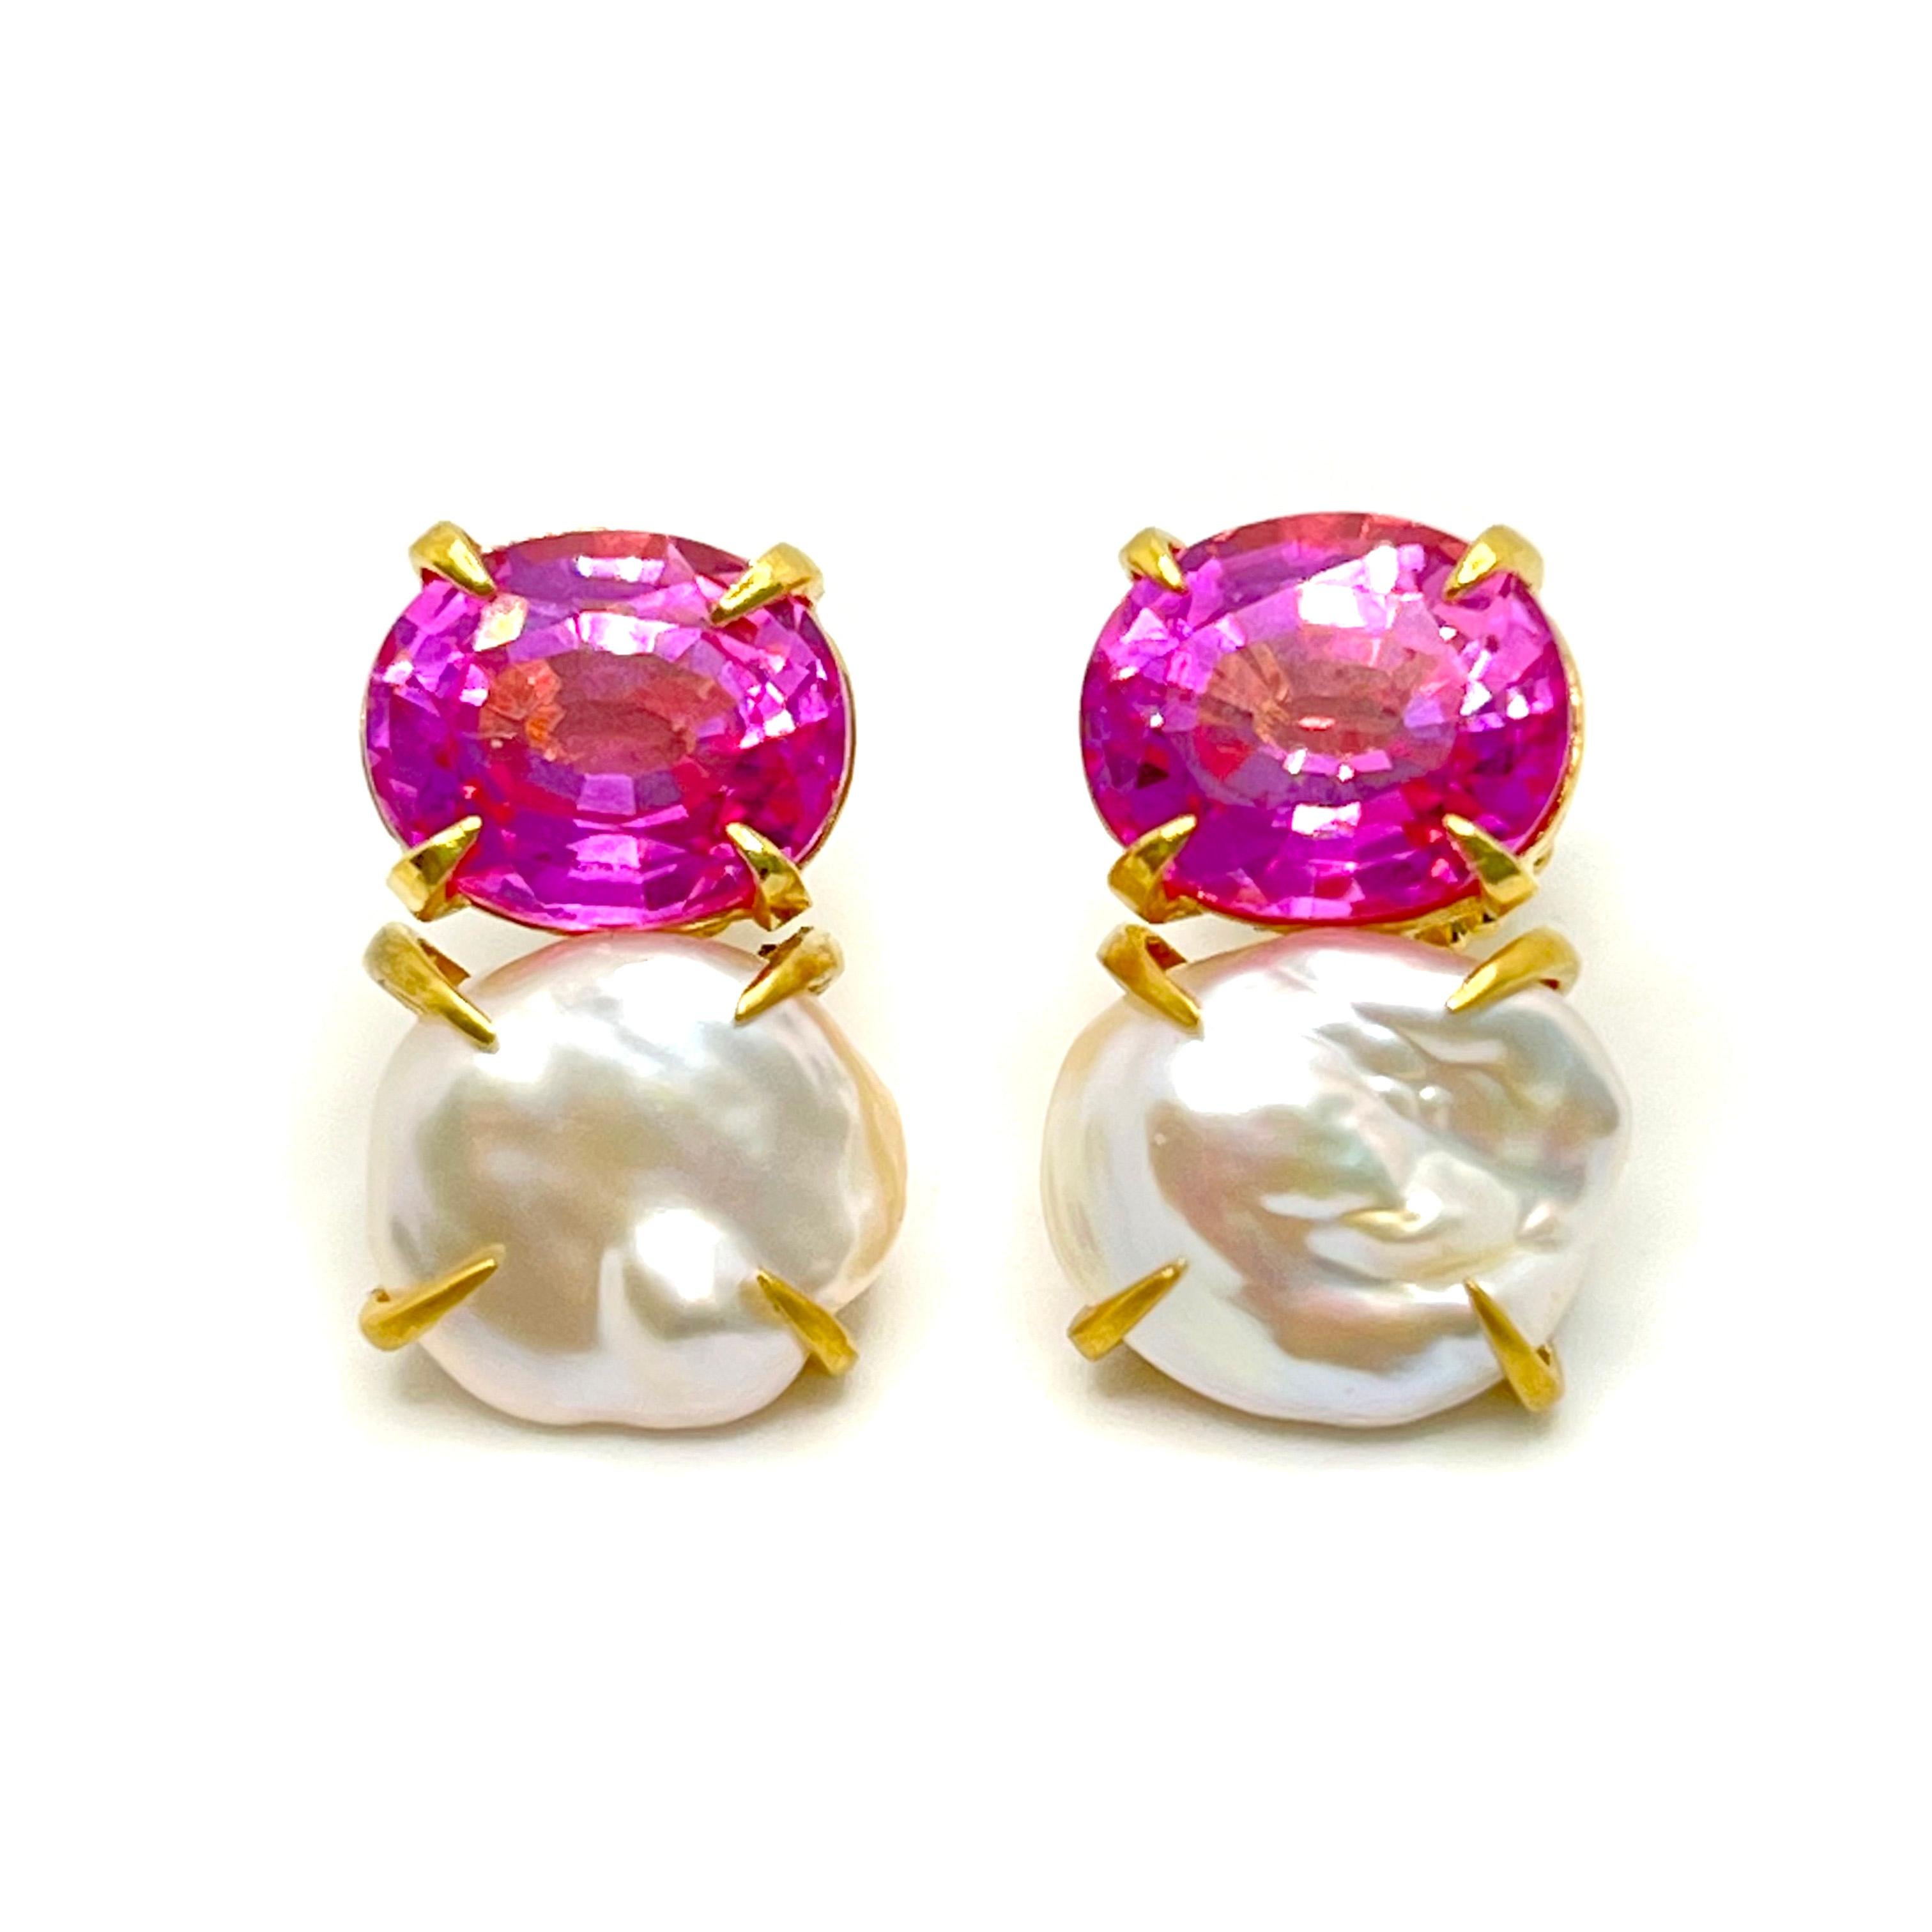 Bijoux Num Oval Pink Sapphire and Keishi Pearl Vermeil Earrings. 

The stunning pair of earrings feature beautiful lab-created pink sapphire and lustrous cultured Japanese Keishi pearl, handset in 18k gold vermeil over sterling silver and brush